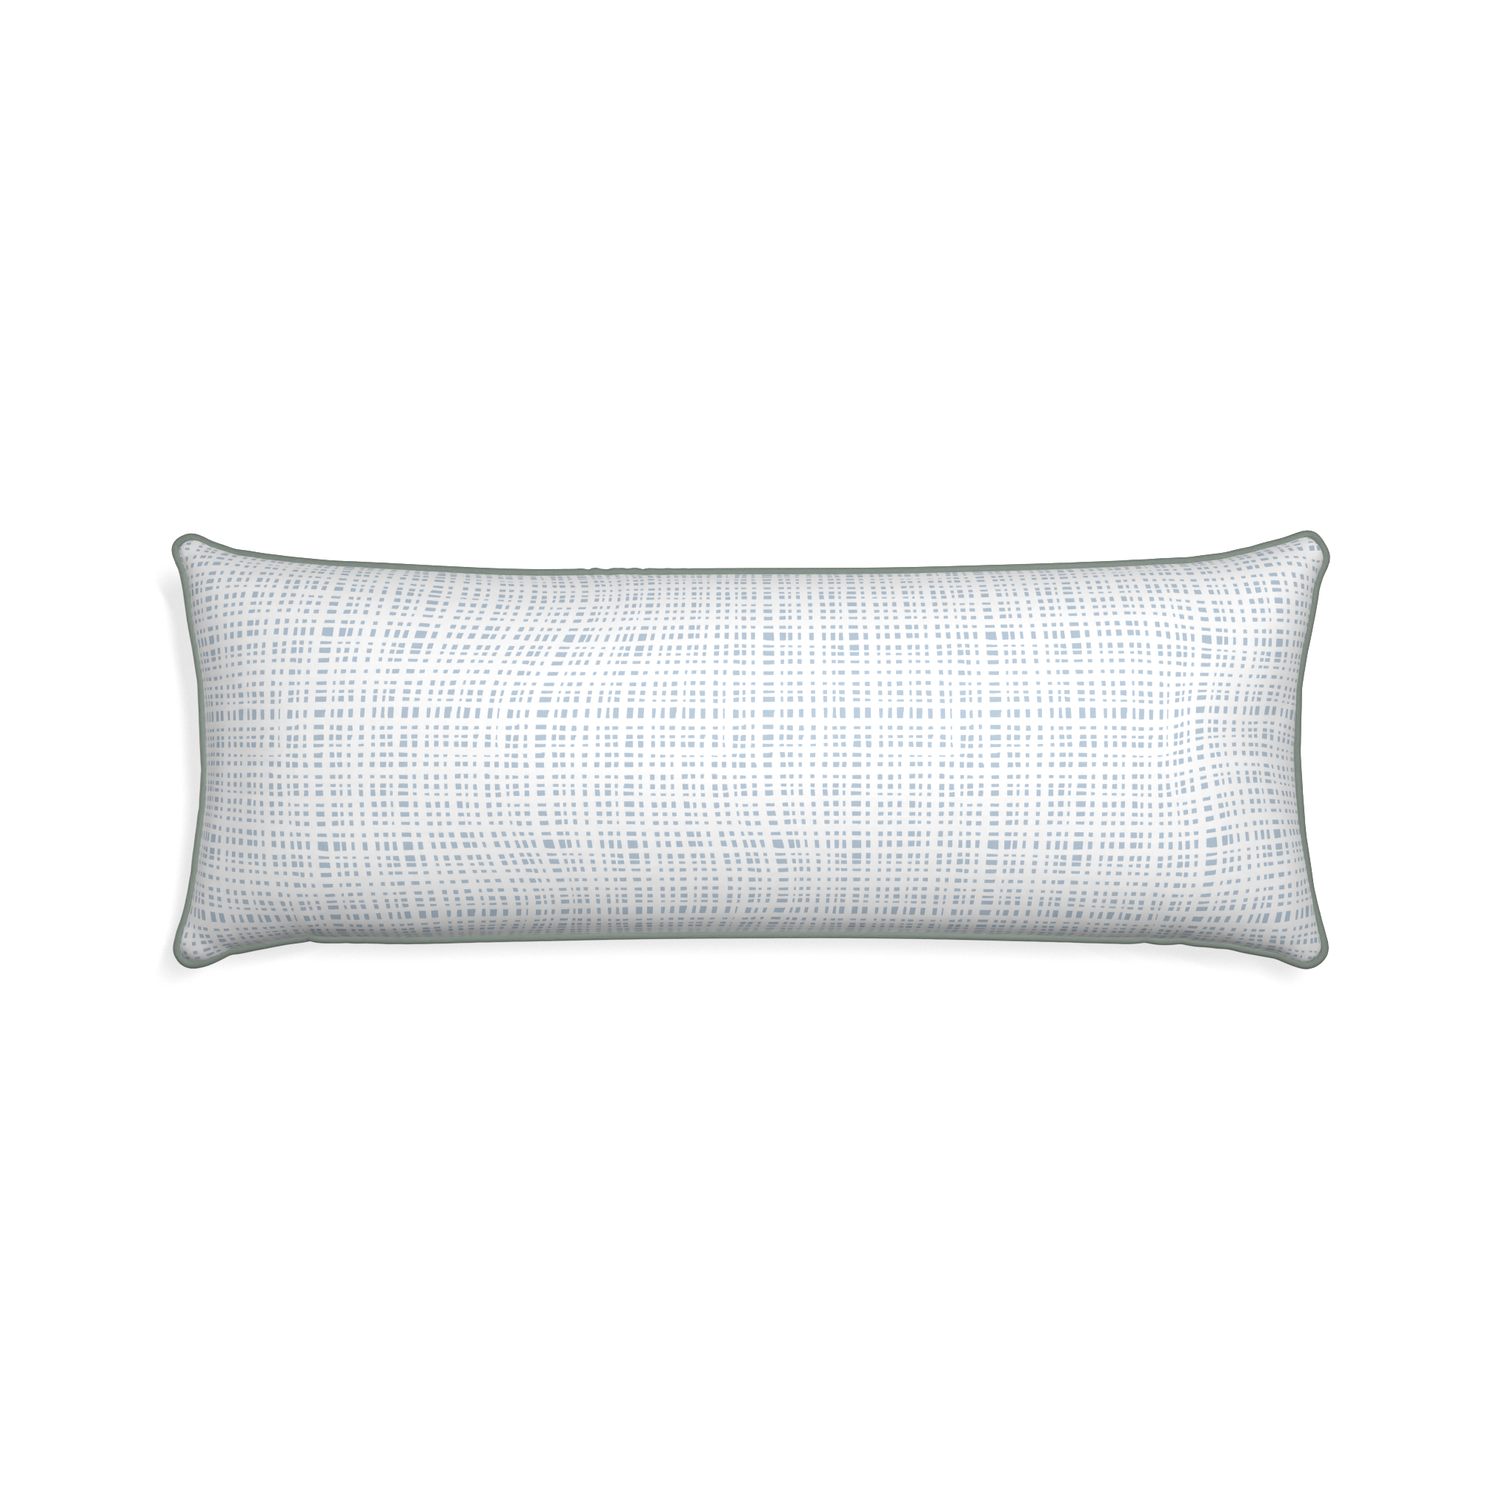 Xl-lumbar ginger custom plaid sky bluepillow with sage piping on white background